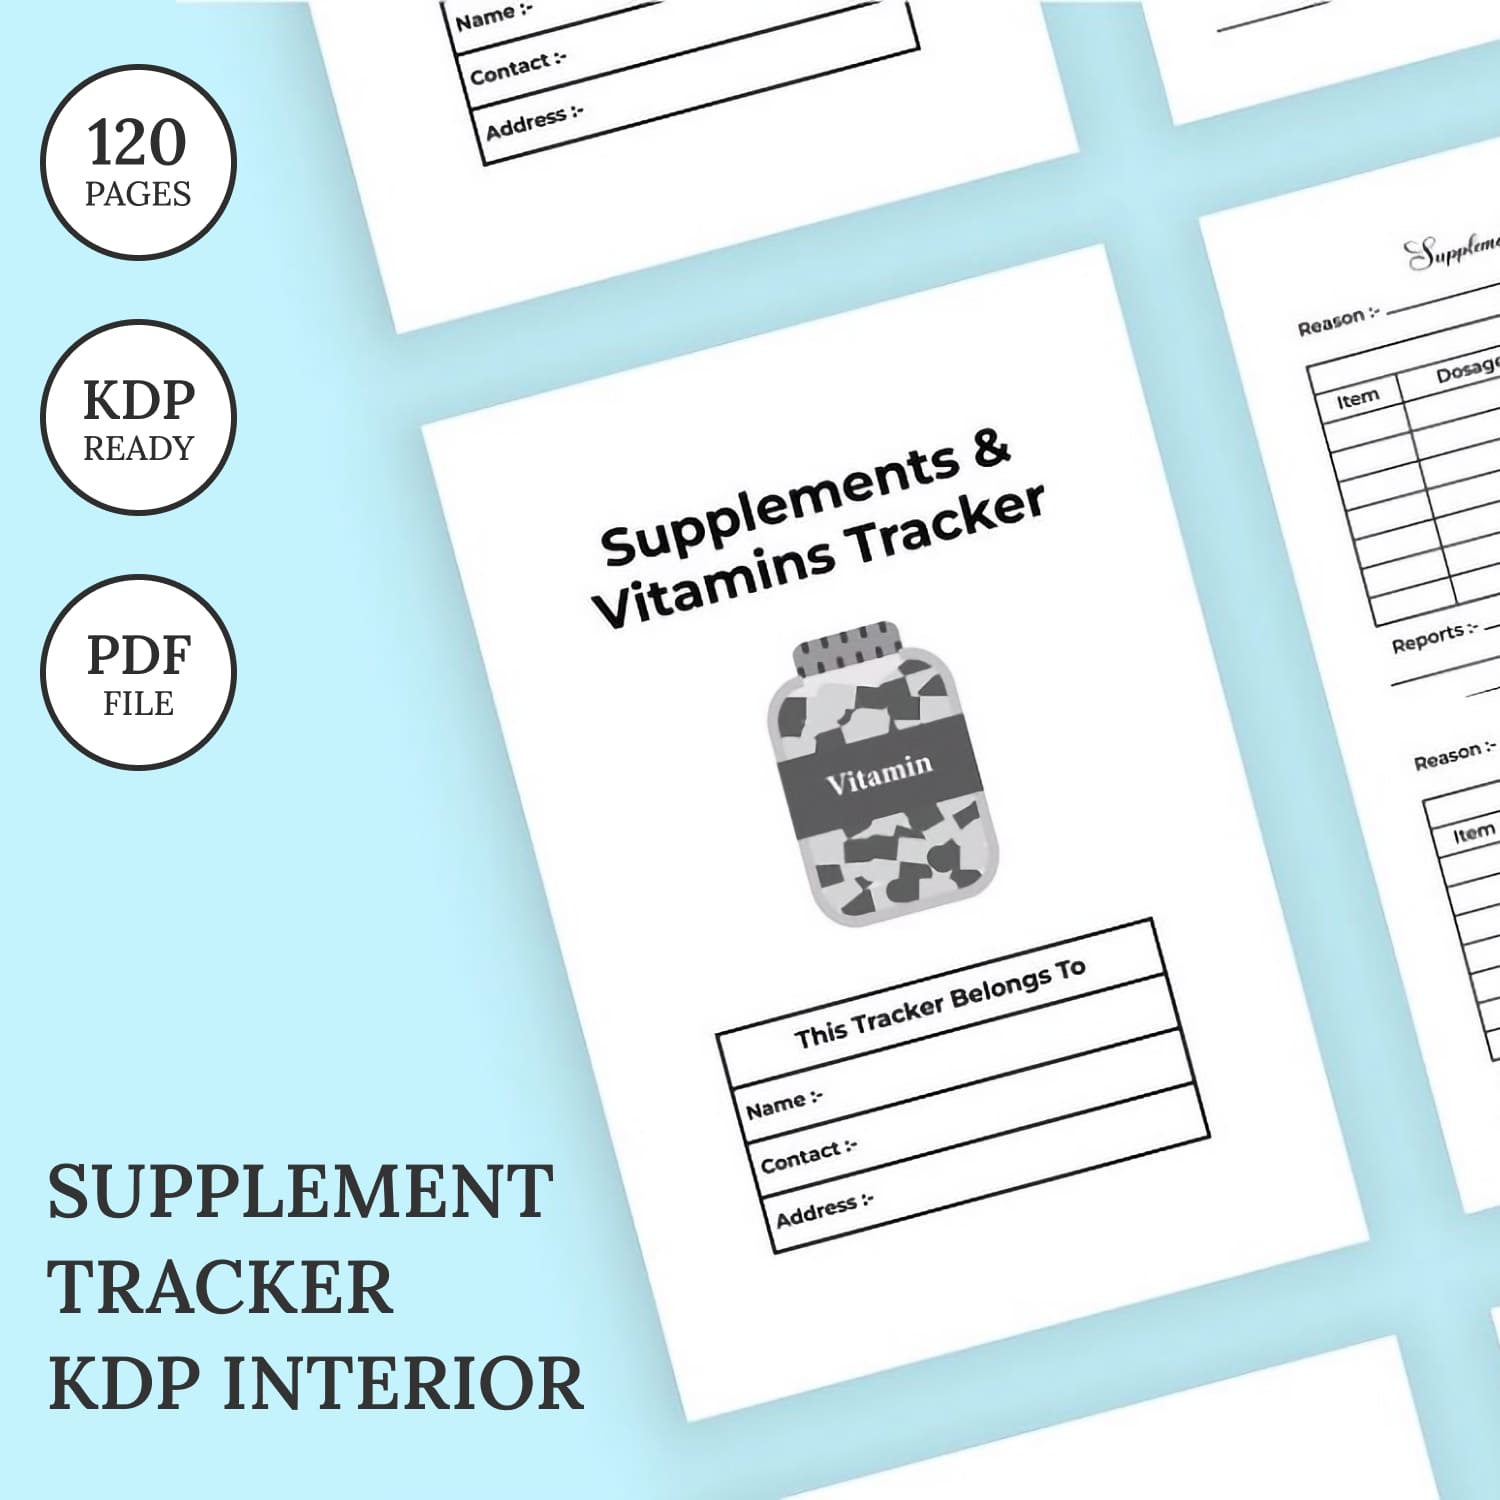 Supplement tracker KDP interior - main image preview.